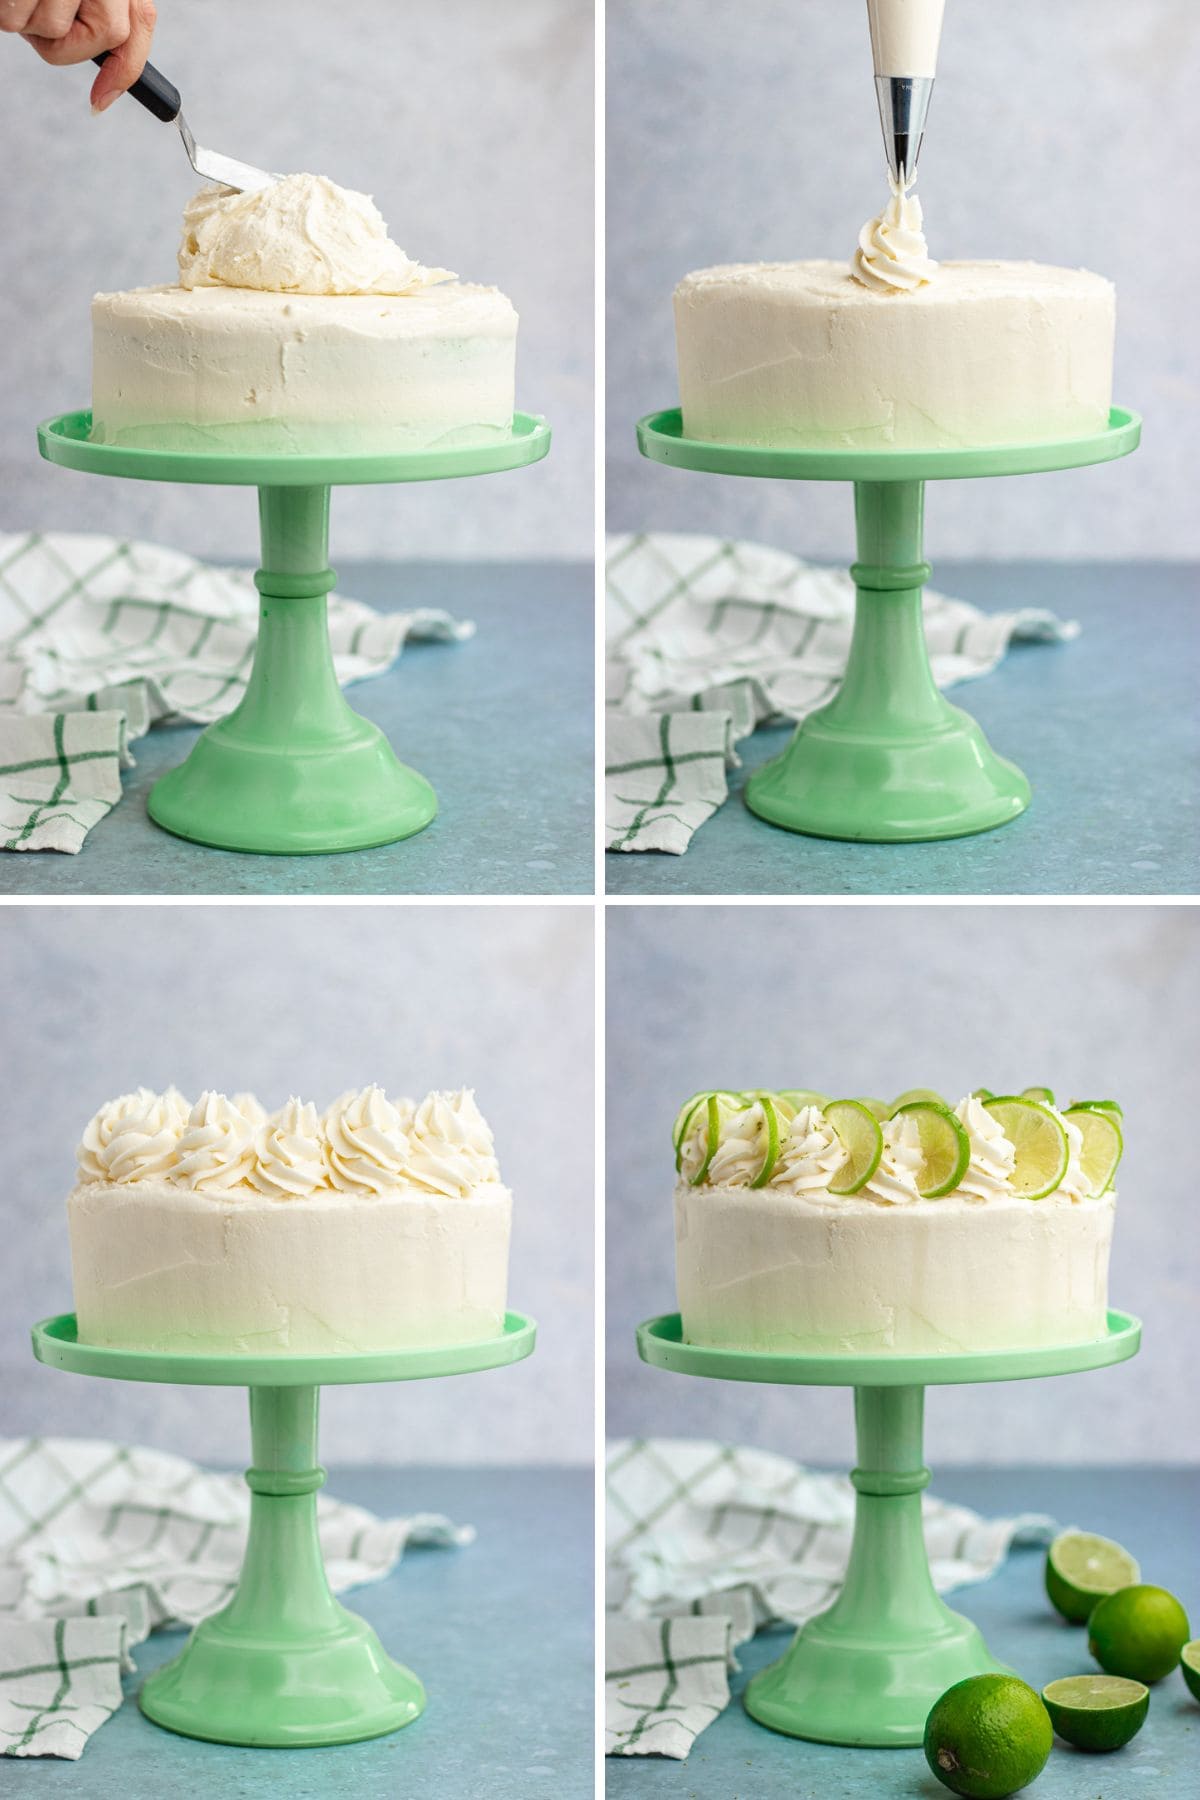 Key Lime Cake collage decorating cake on stand.